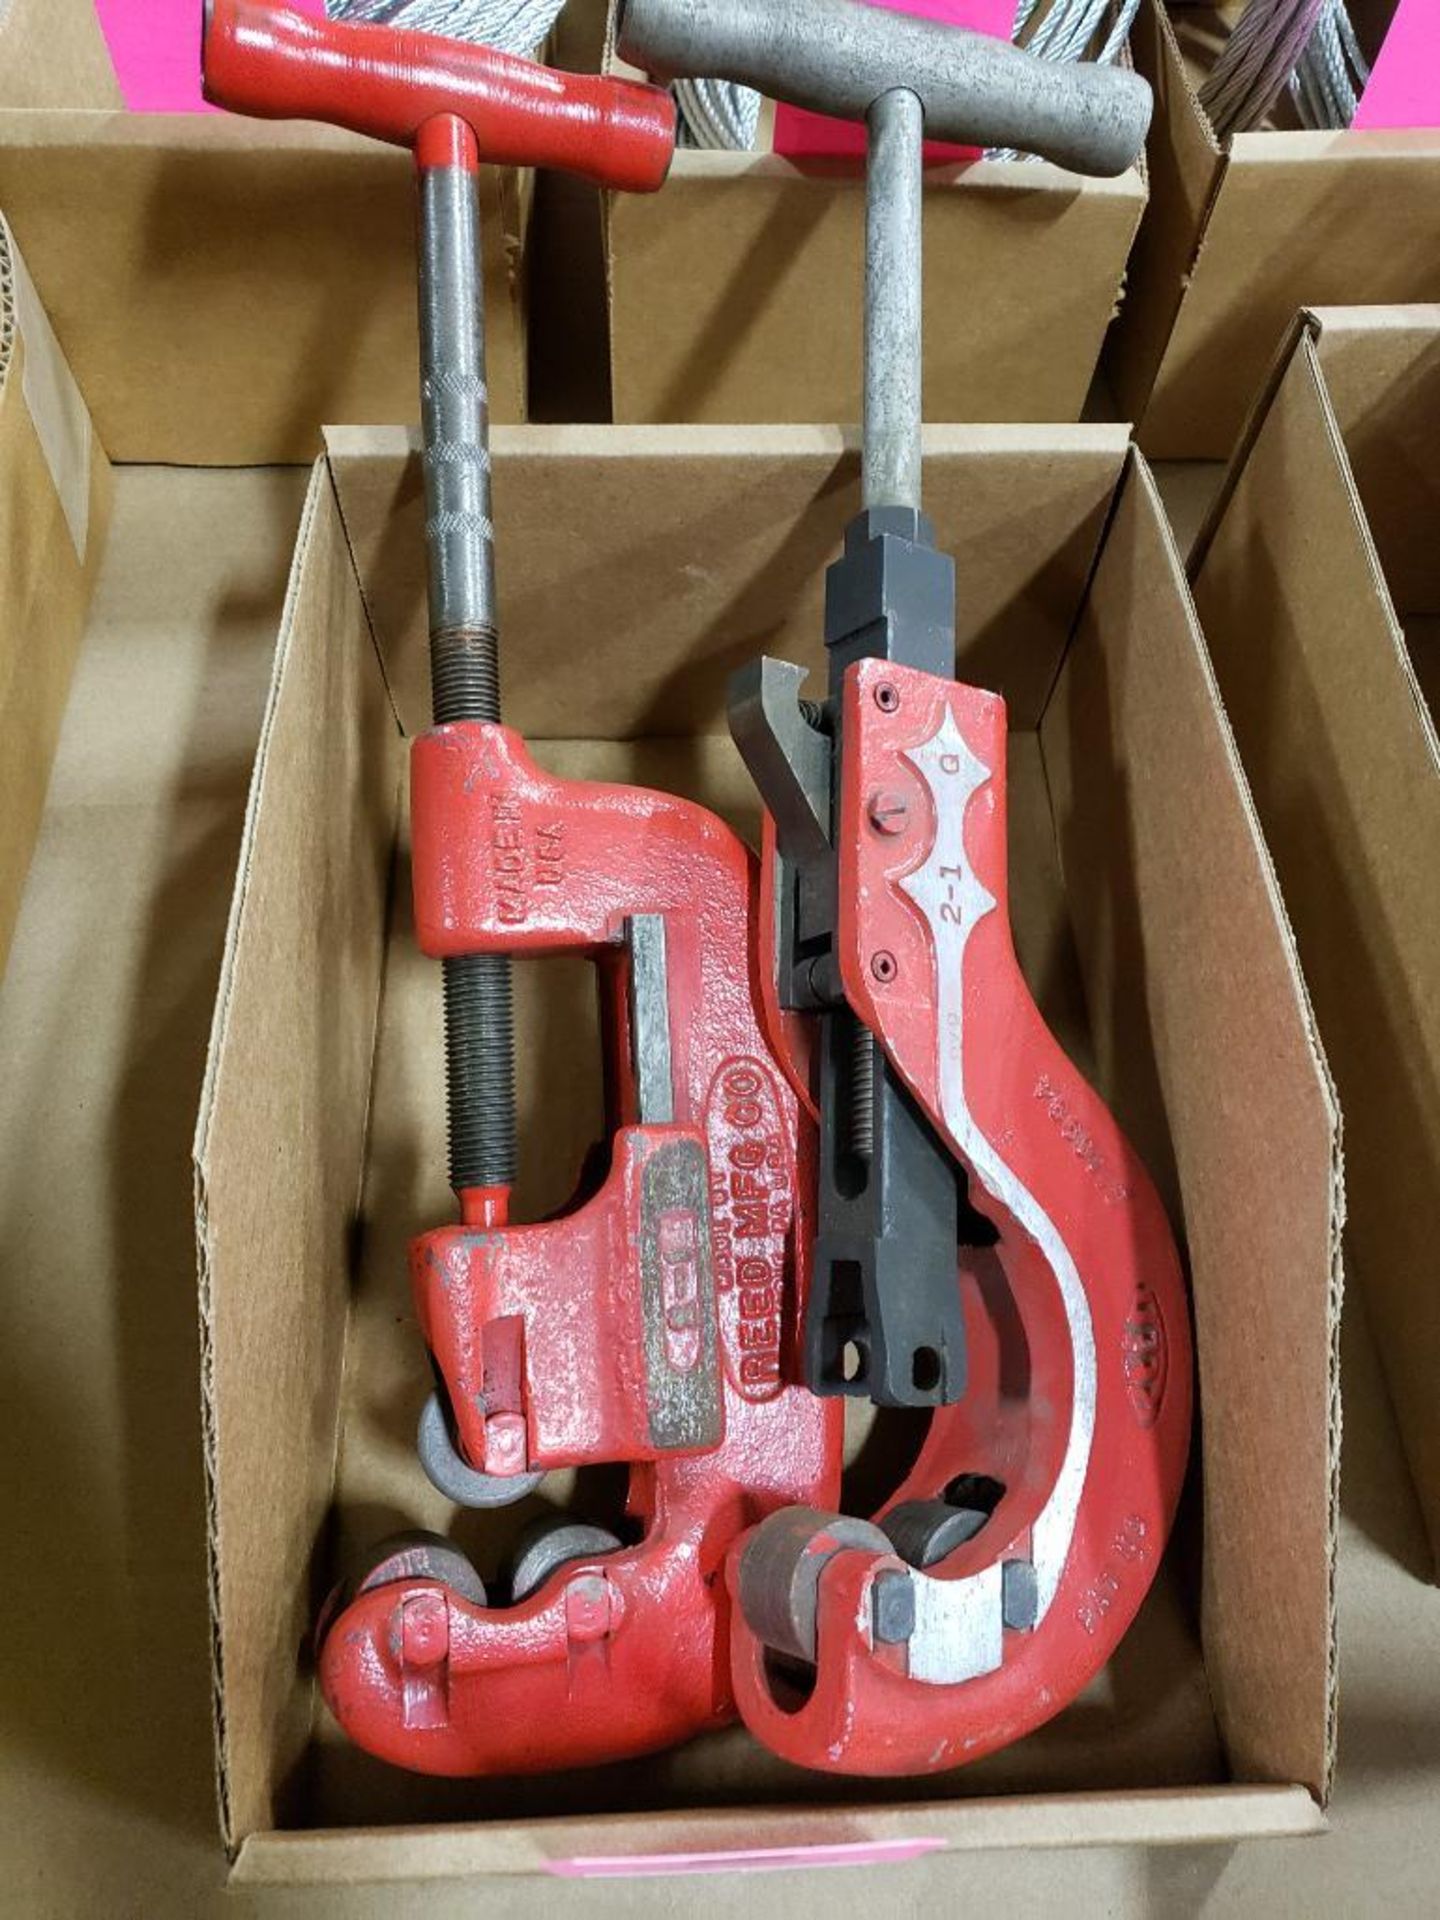 Qty 2 - Reed MFG. Co. Pipe Cutter.